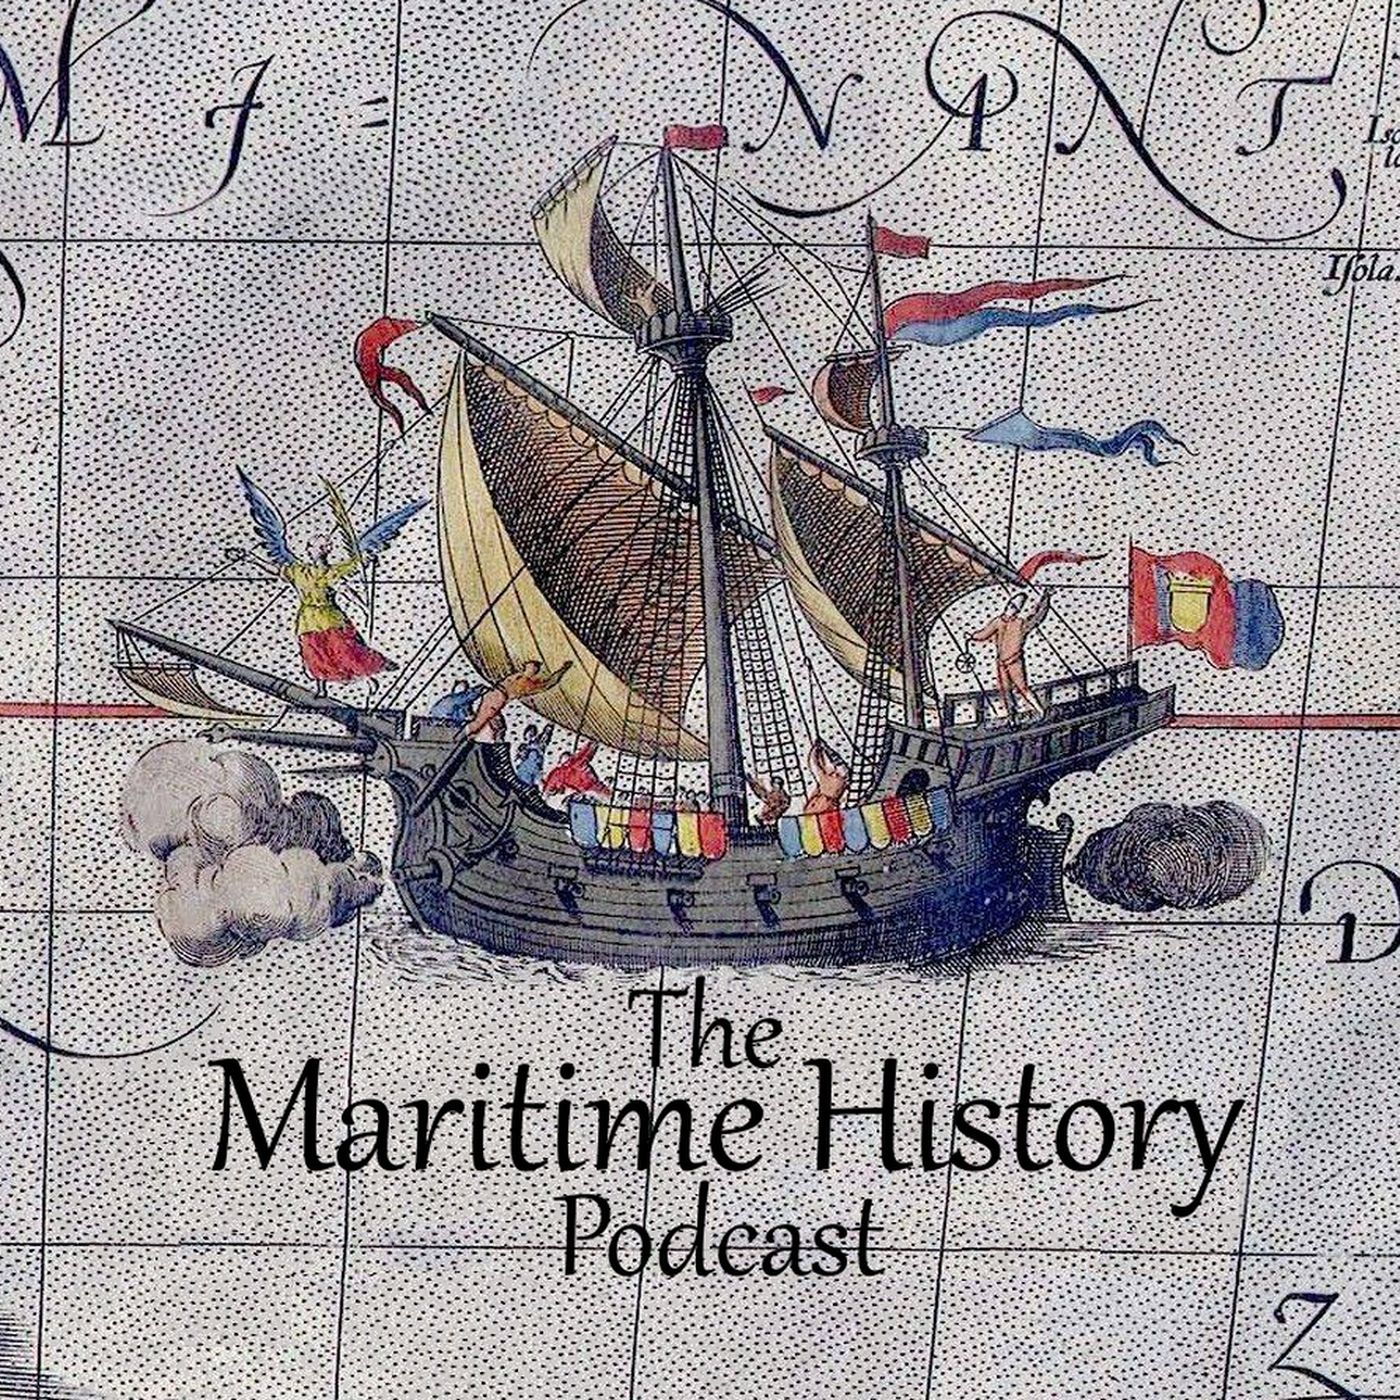 The Maritime History Podcast